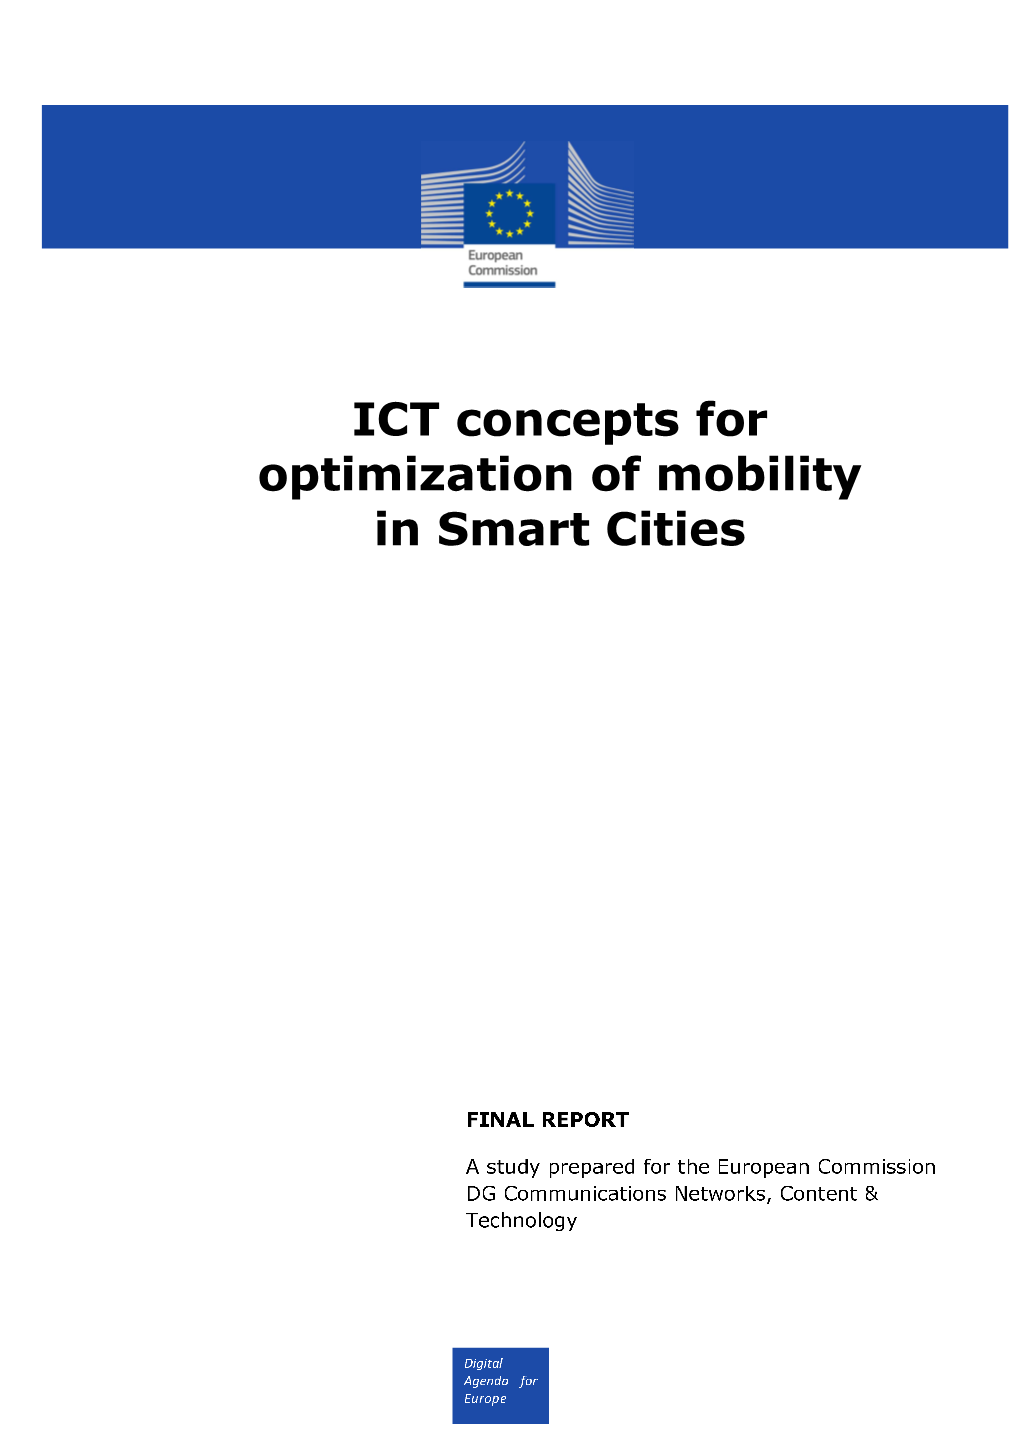 ICT Concepts for Optimization of Mobility in Smart Cities